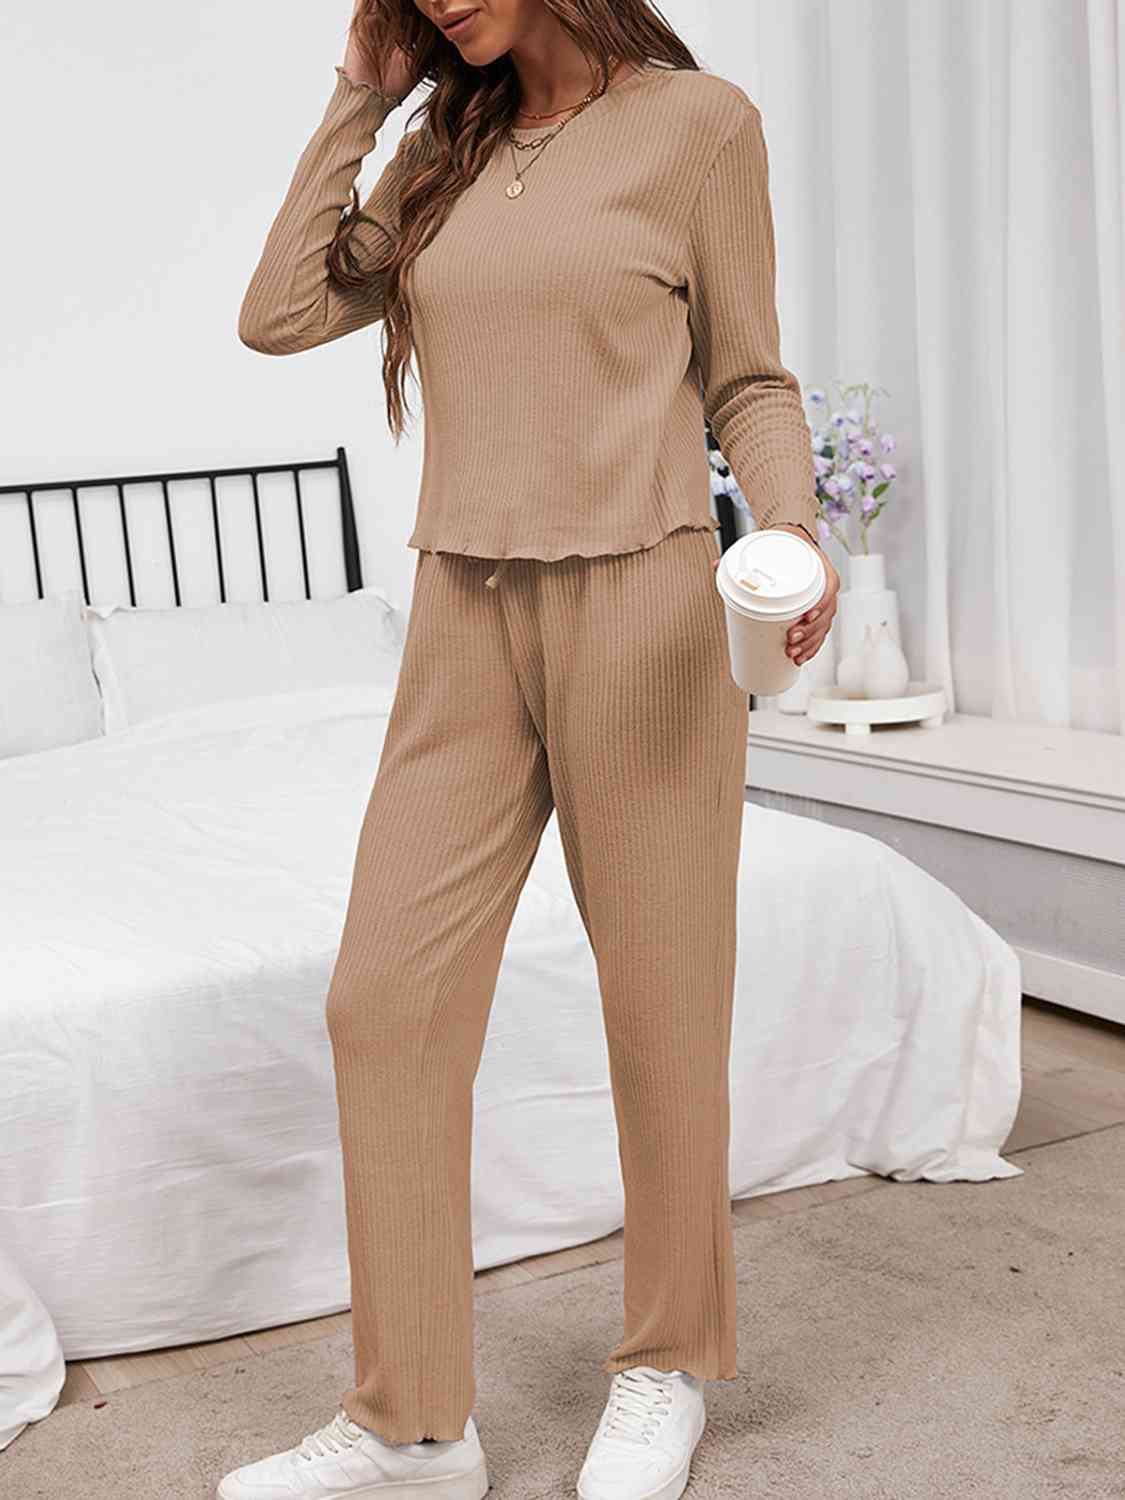 Round Neck Long Sleeve Top and Drawstring Pants Lounge Set - Fashion Girl Online Store